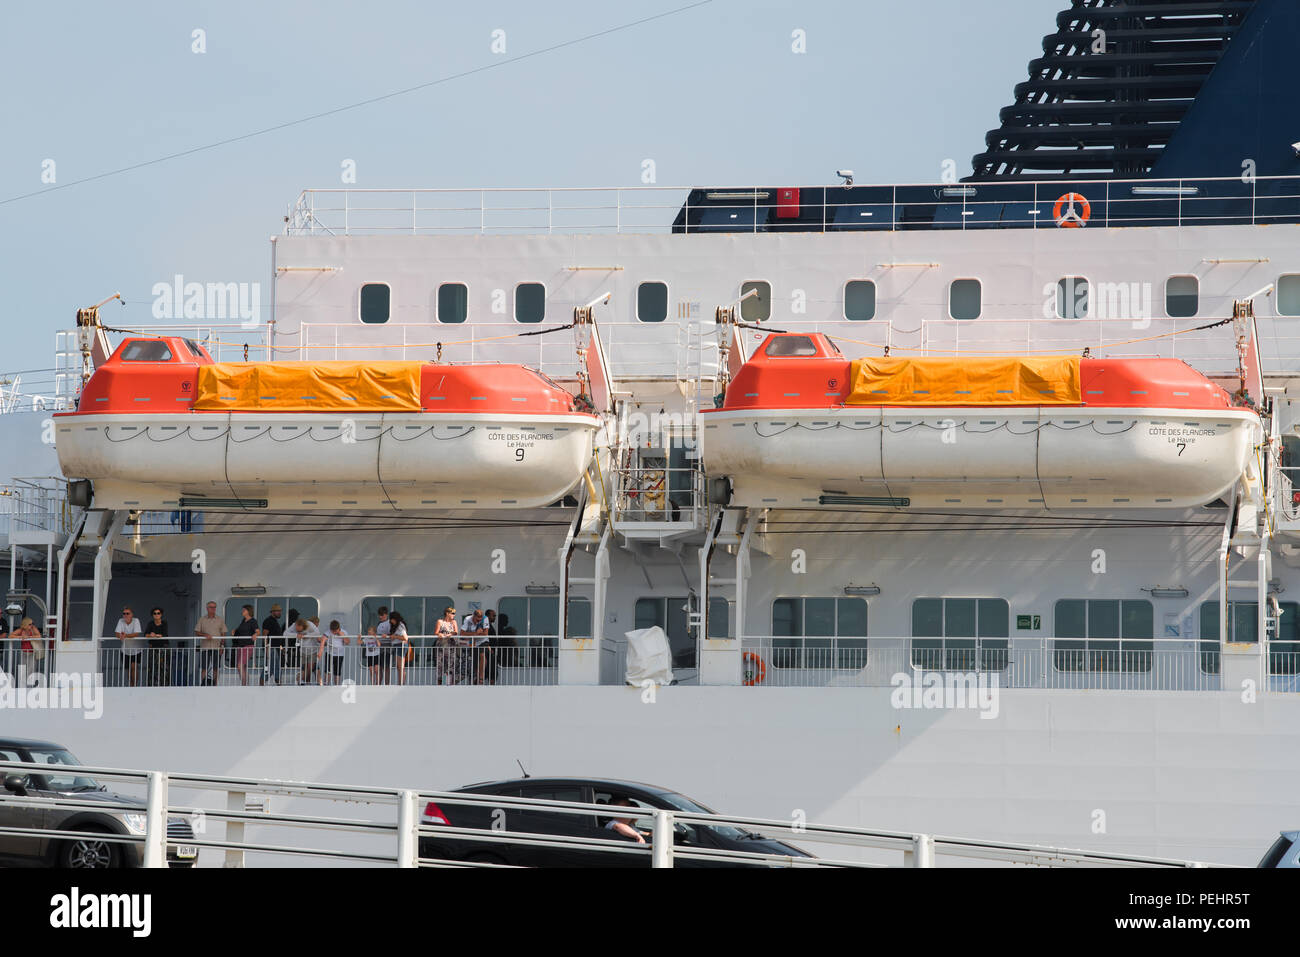 Two lifeboats above passengers on a ferry docked at the port of Calais, France. Stock Photo